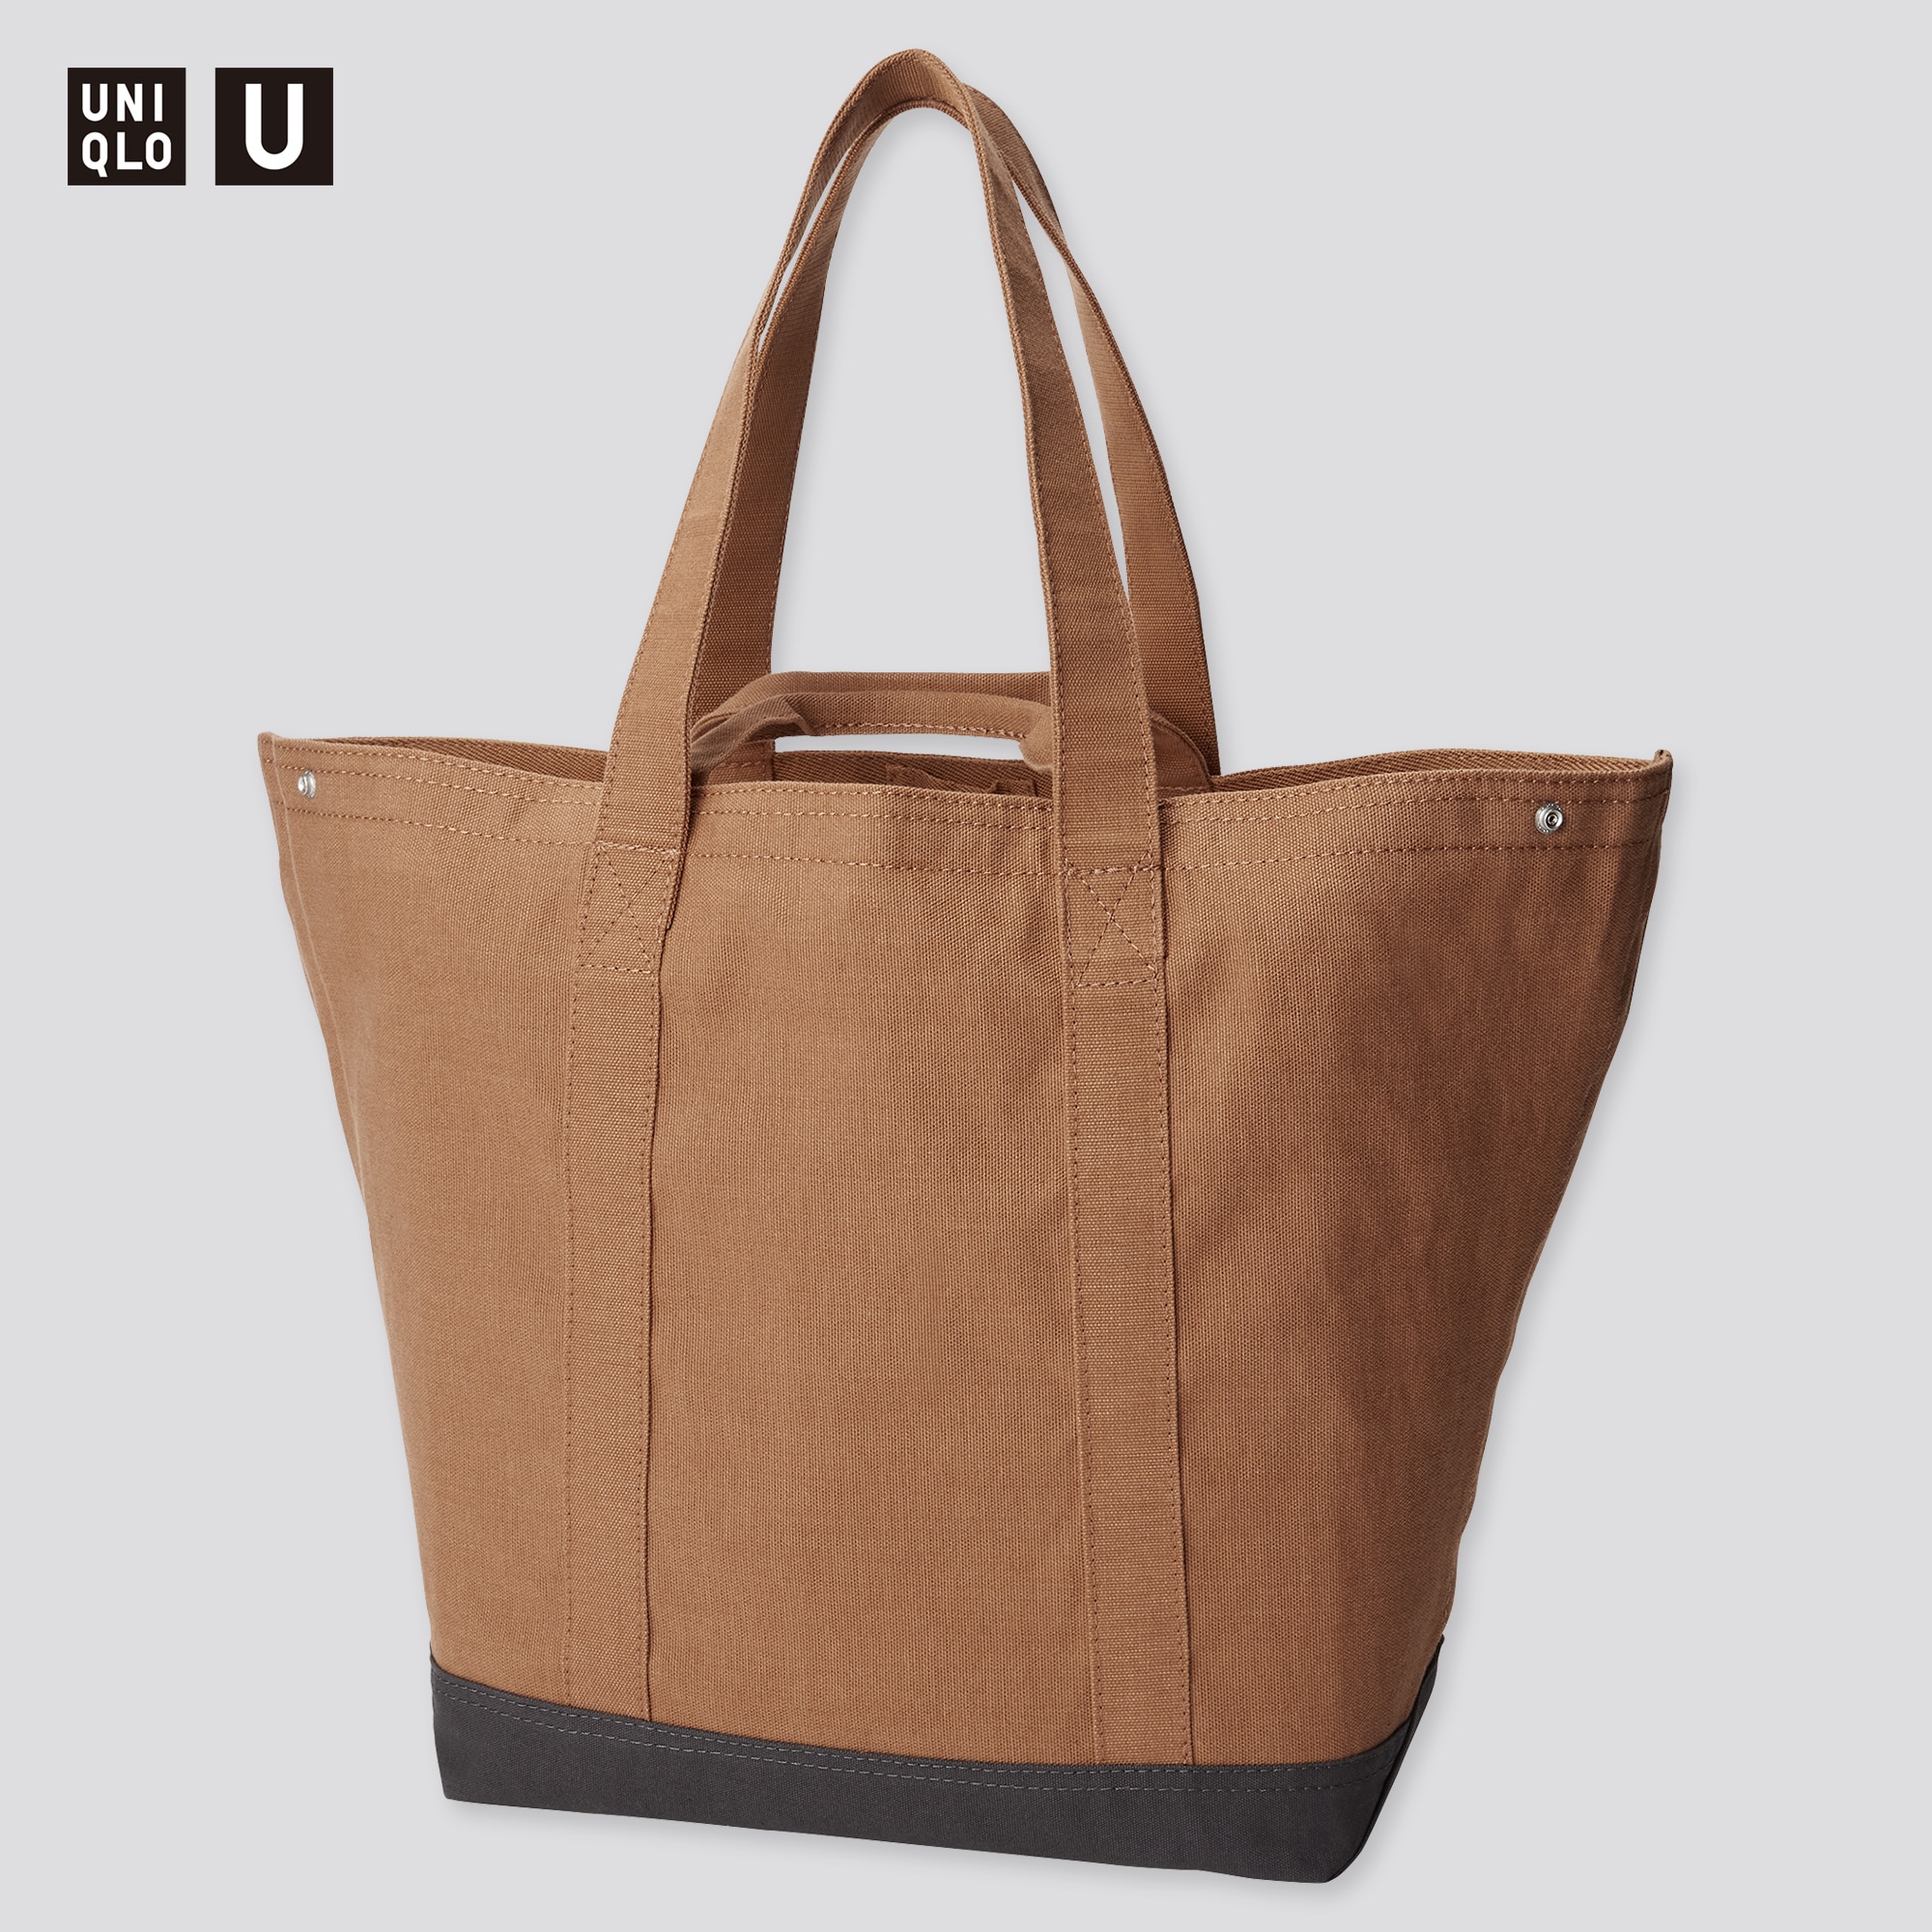 This $20 Uniqlo Bag Is the Hottest Product of the Quarter